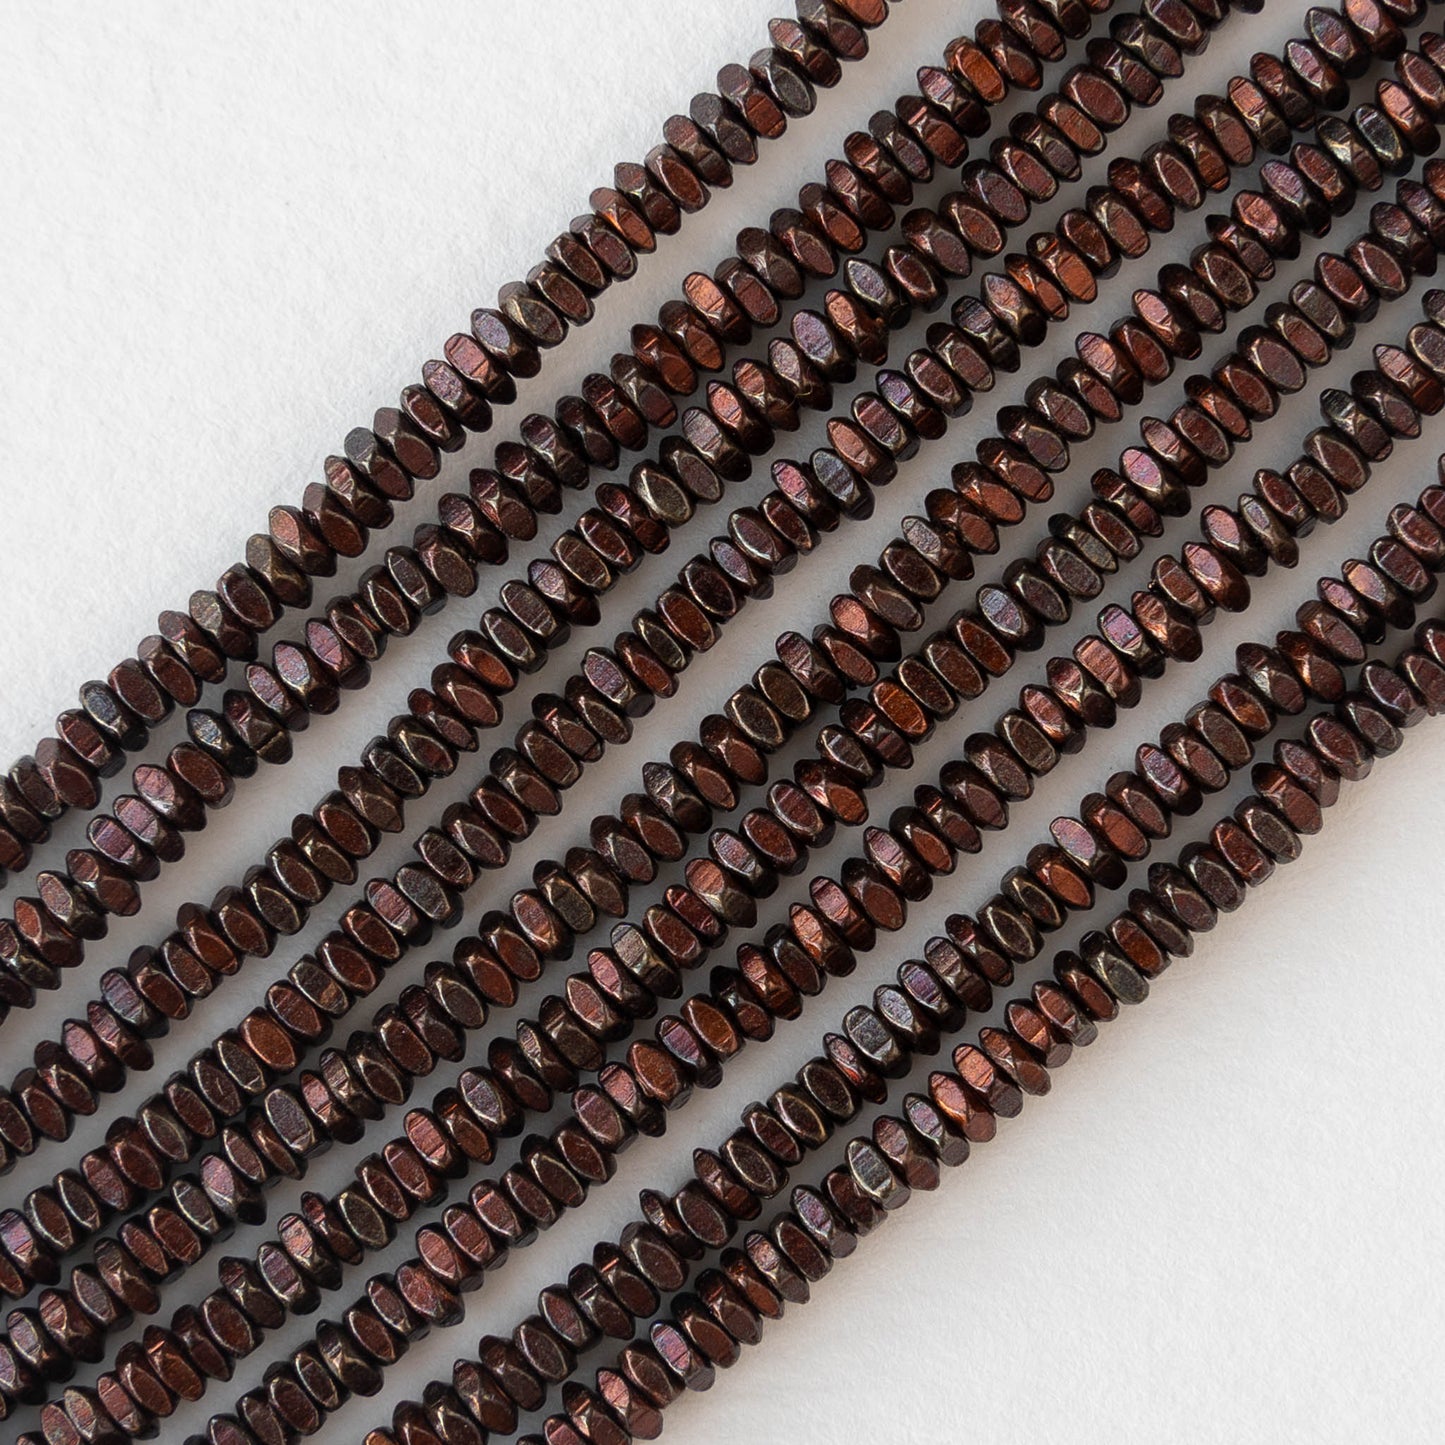 2.5mm Oxidized Copper Square Disk Beads - 100